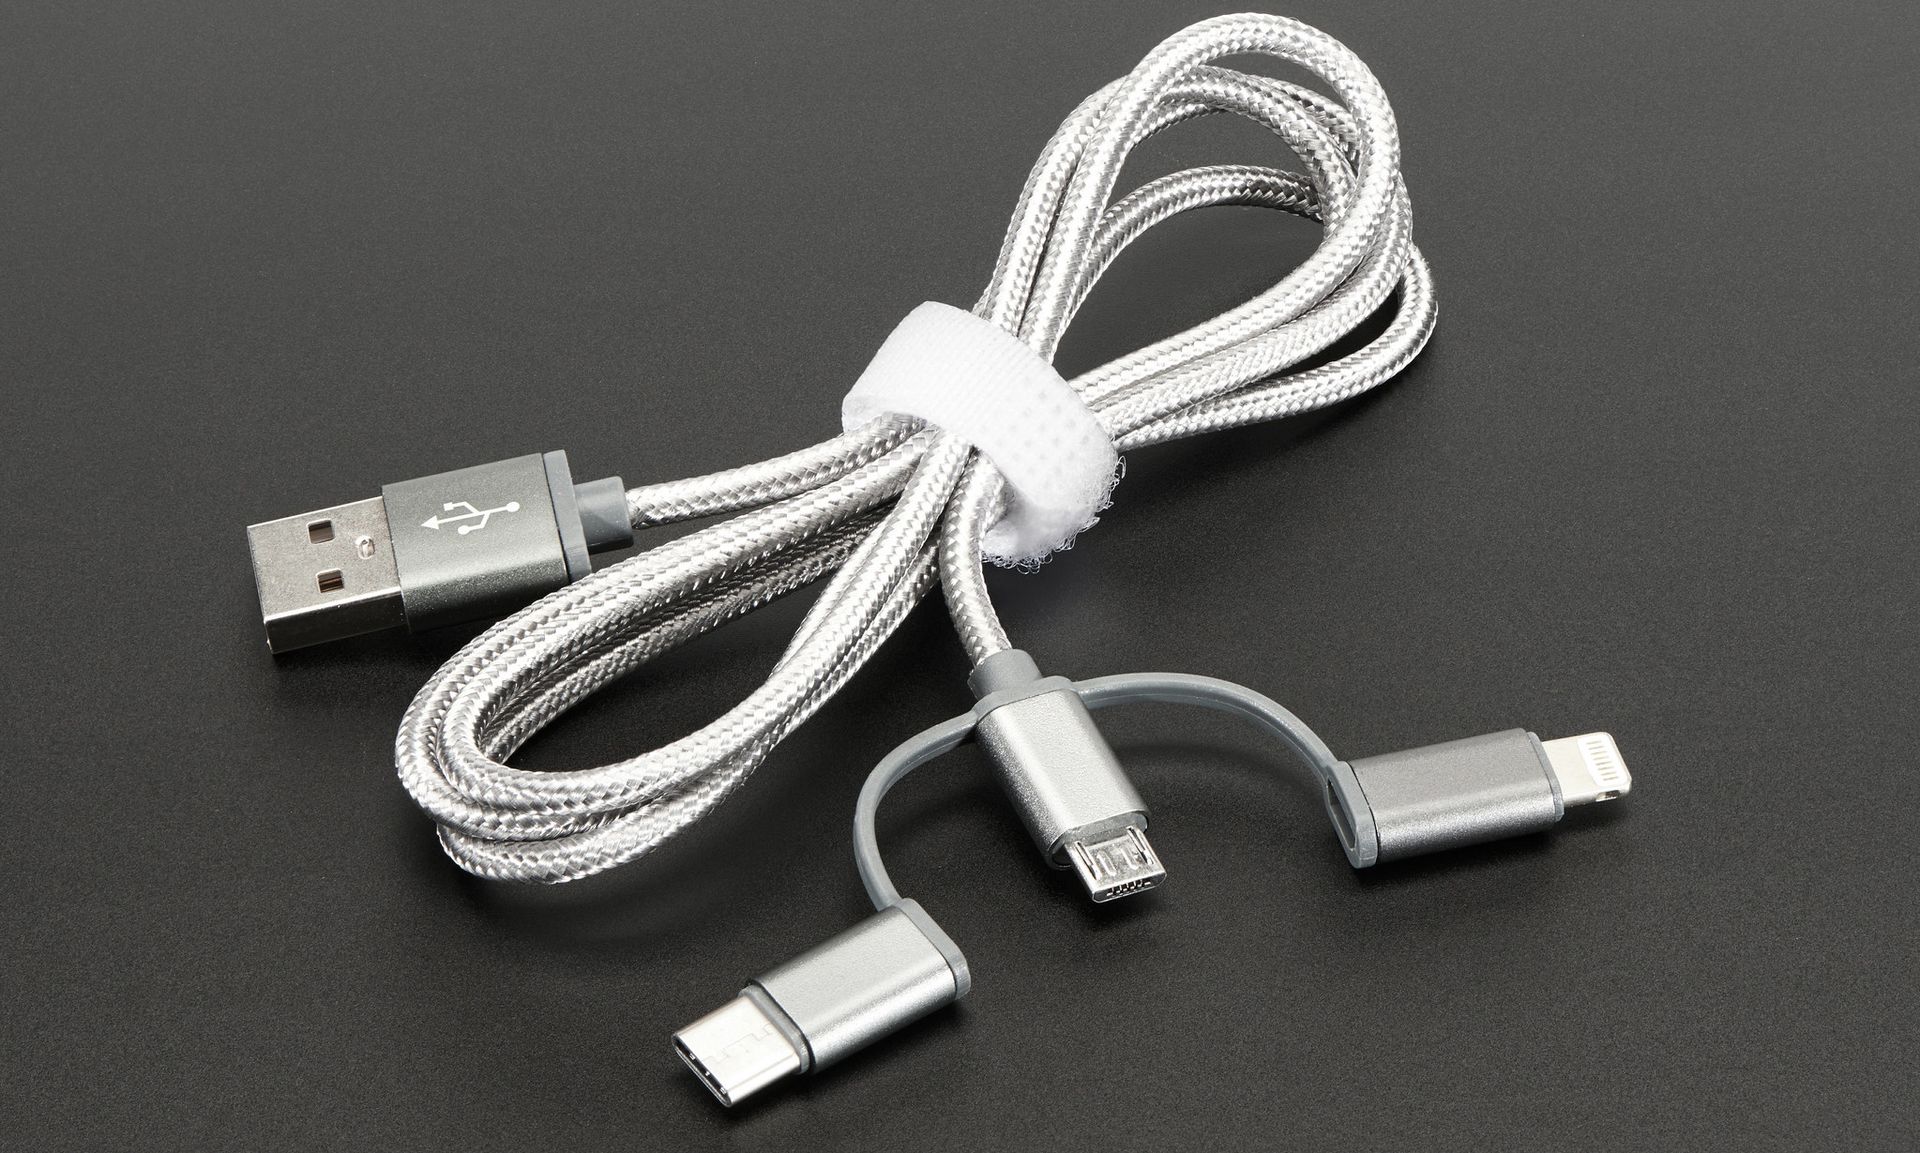 A USB 3-in-1 sync and charge cable is seen. Researchers will speak about planned in the robotics market at Thursday&#8217;s Black Hat. (&#8220;USB 3-in-1 Sync and Charge Cable &#8211; Micro B / Type-C / Lightning&#8221; by adafruit is licensed under CC BY-NC-SA 2.0)